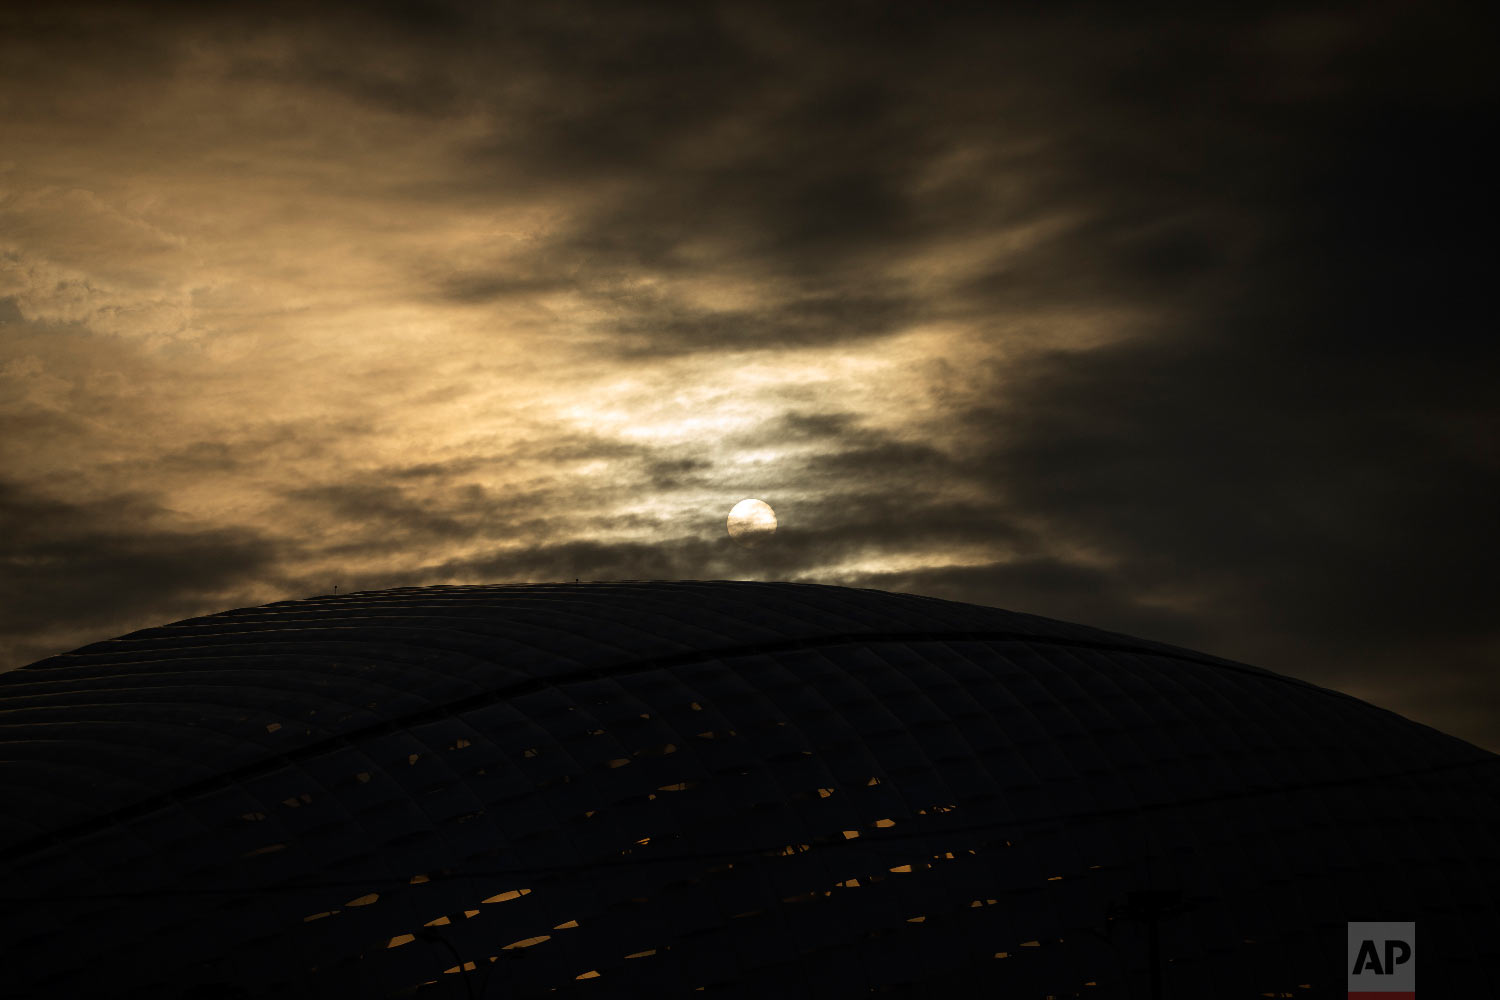  The sun shines through the clouds above the Fisht Stadium at the 2018 soccer World Cup in Sochi, Russia on June 29, 2018. (AP Photo/Francisco Seco) 